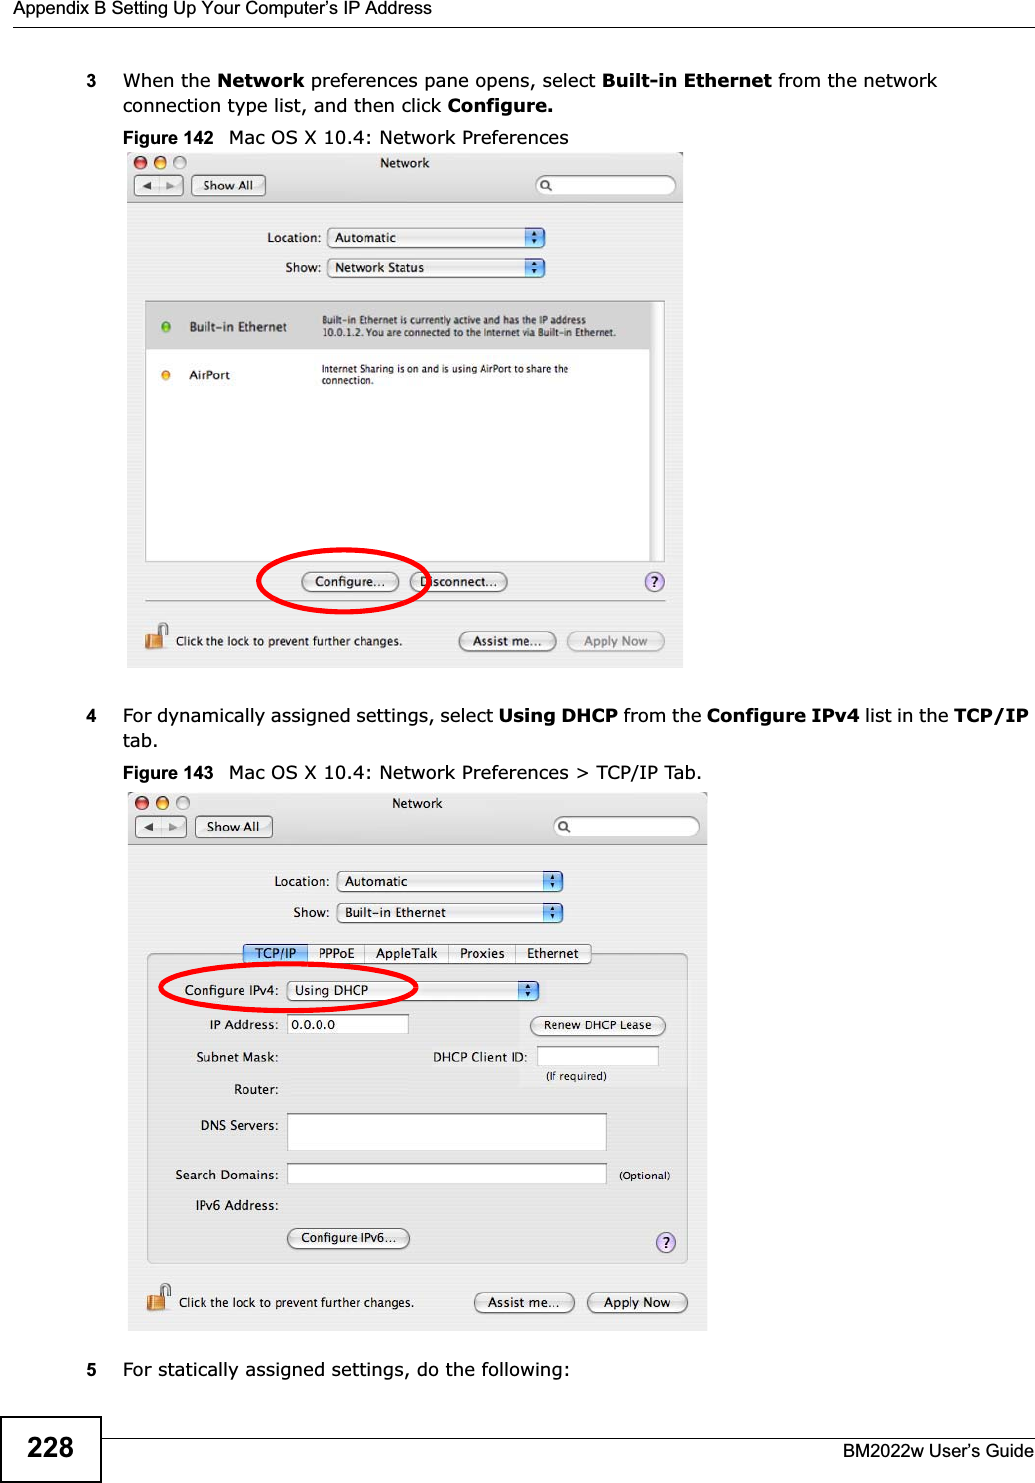 Appendix B Setting Up Your Computer’s IP AddressBM2022w User’s Guide2283When the Network preferences pane opens, select Built-in Ethernet from the network connection type list, and then click Configure.Figure 142   Mac OS X 10.4: Network Preferences4For dynamically assigned settings, select Using DHCP from the Configure IPv4 list in the TCP/IPtab.Figure 143   Mac OS X 10.4: Network Preferences &gt; TCP/IP Tab.5For statically assigned settings, do the following: